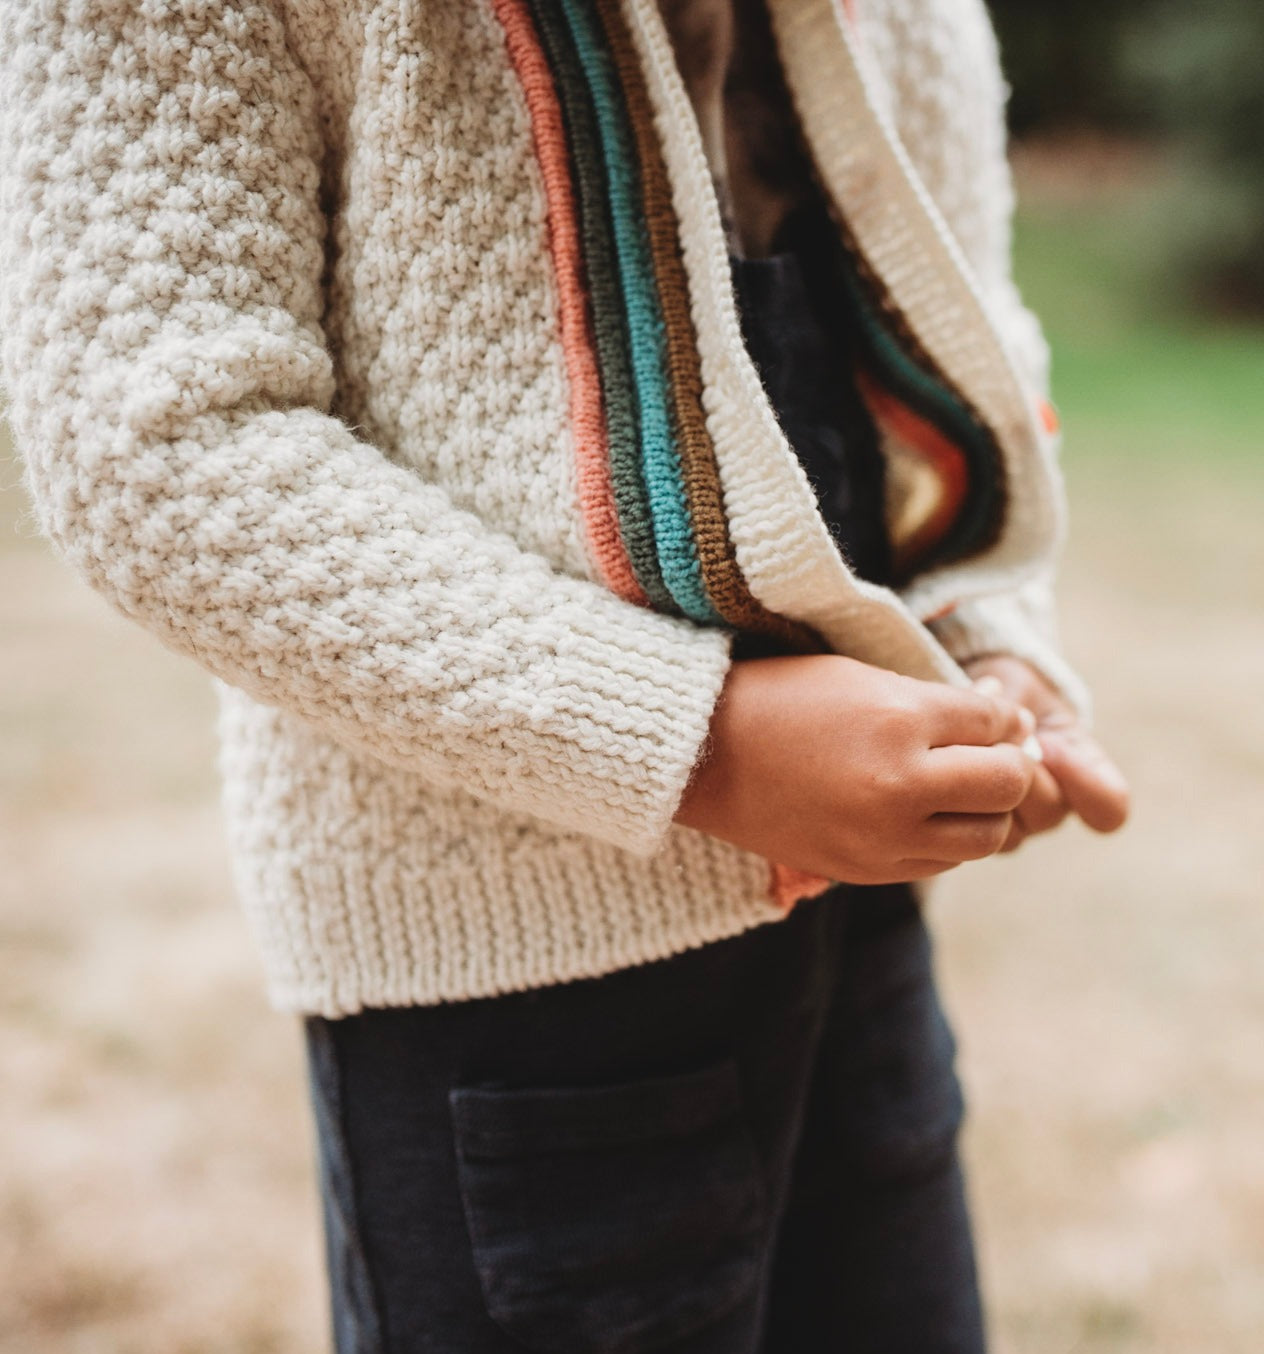 Seen close up from a 3/4 angle, a young boy buttons up hand knit jacket, knit in cream with brown, green, blue, and orange plackets around the button band.